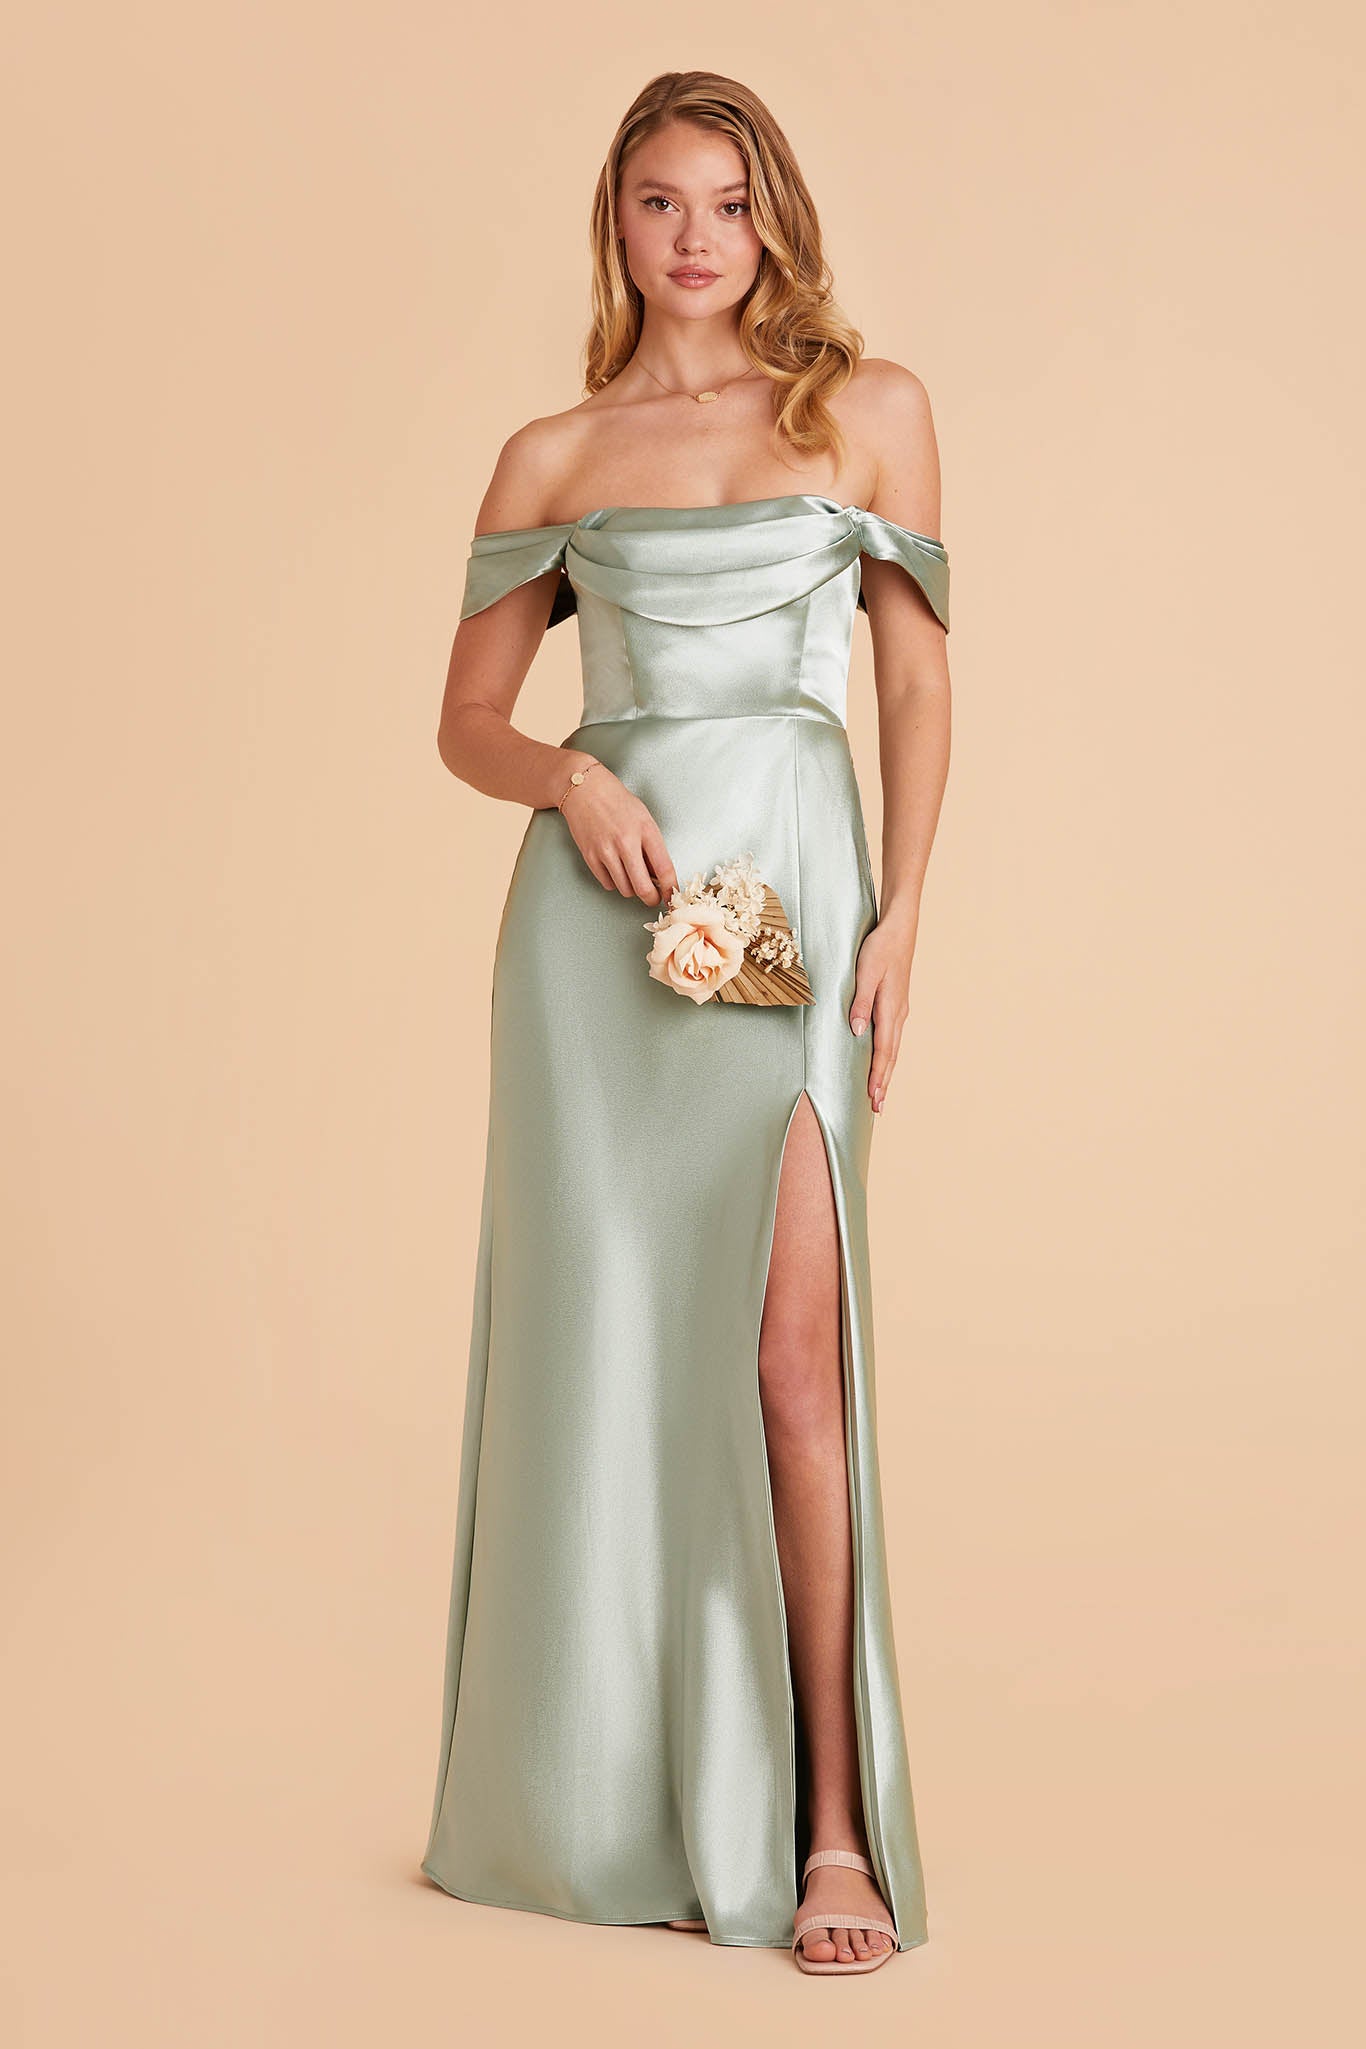 sage green satin bridesmaid dress with pleated cowl neck